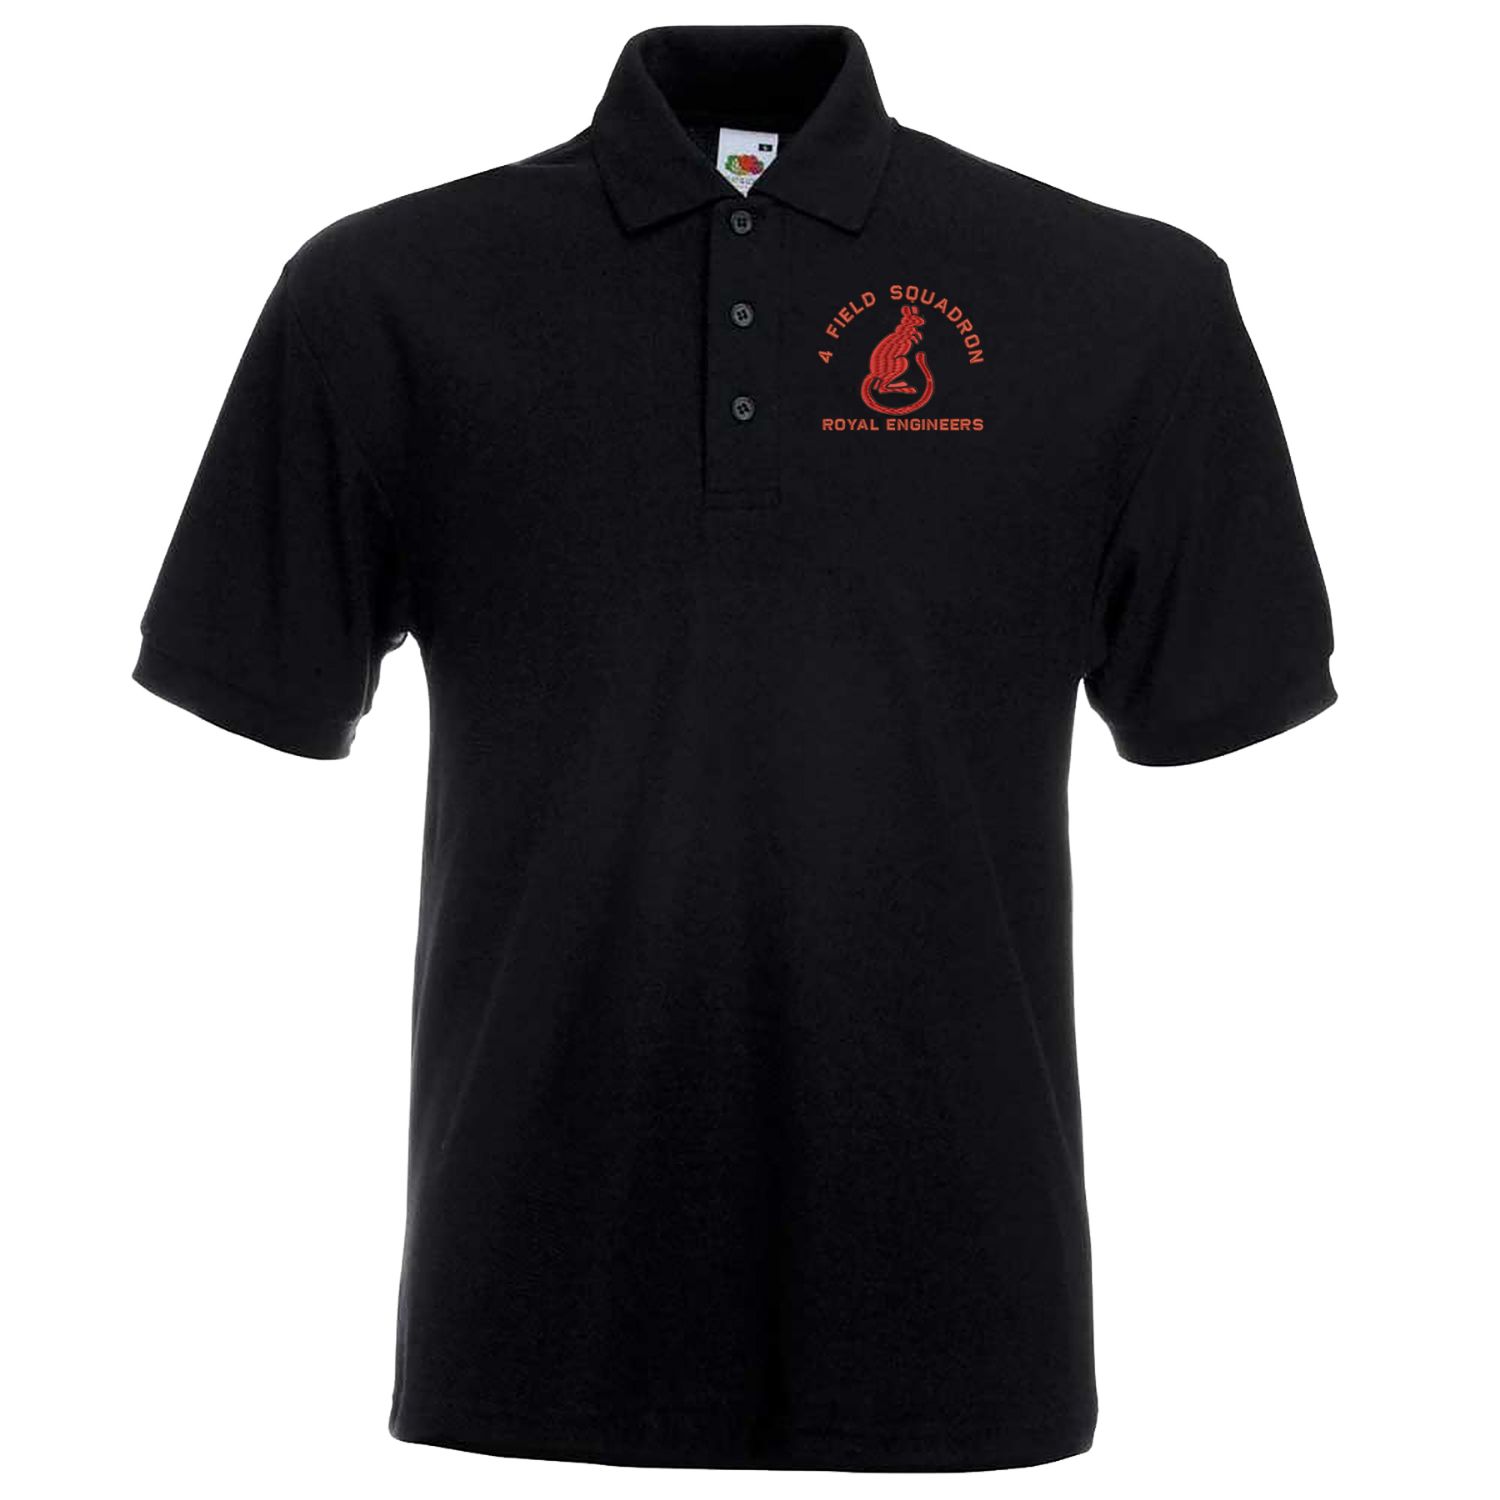 4 Field Sqn Embroidered Polo Shirt SMALL BLK